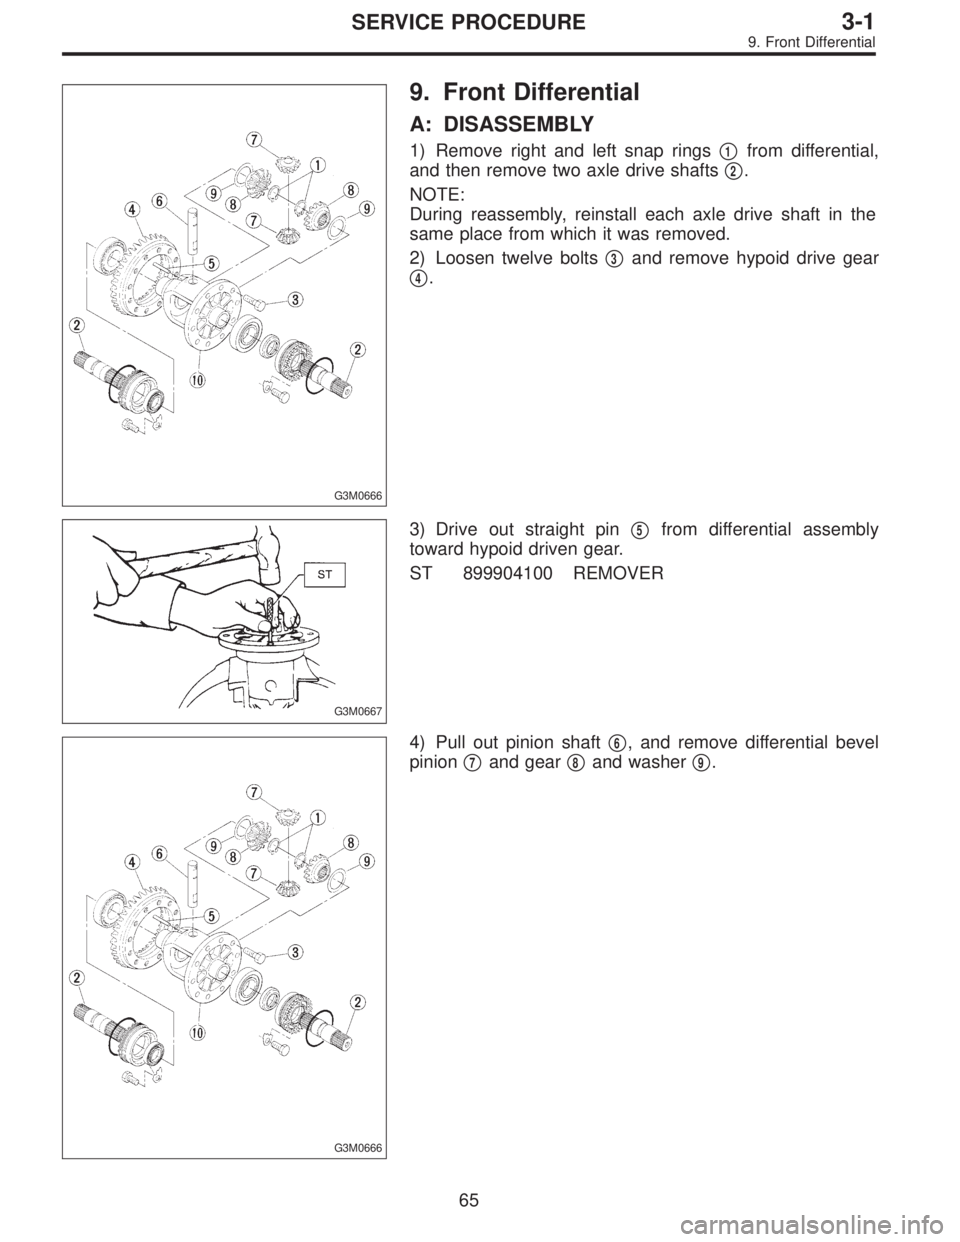 SUBARU LEGACY 1995  Service Repair Manual G3M0666
9. Front Differential
A: DISASSEMBLY
1) Remove right and left snap rings1from differential,
and then remove two axle drive shafts
2.
NOTE:
During reassembly, reinstall each axle drive shaft 